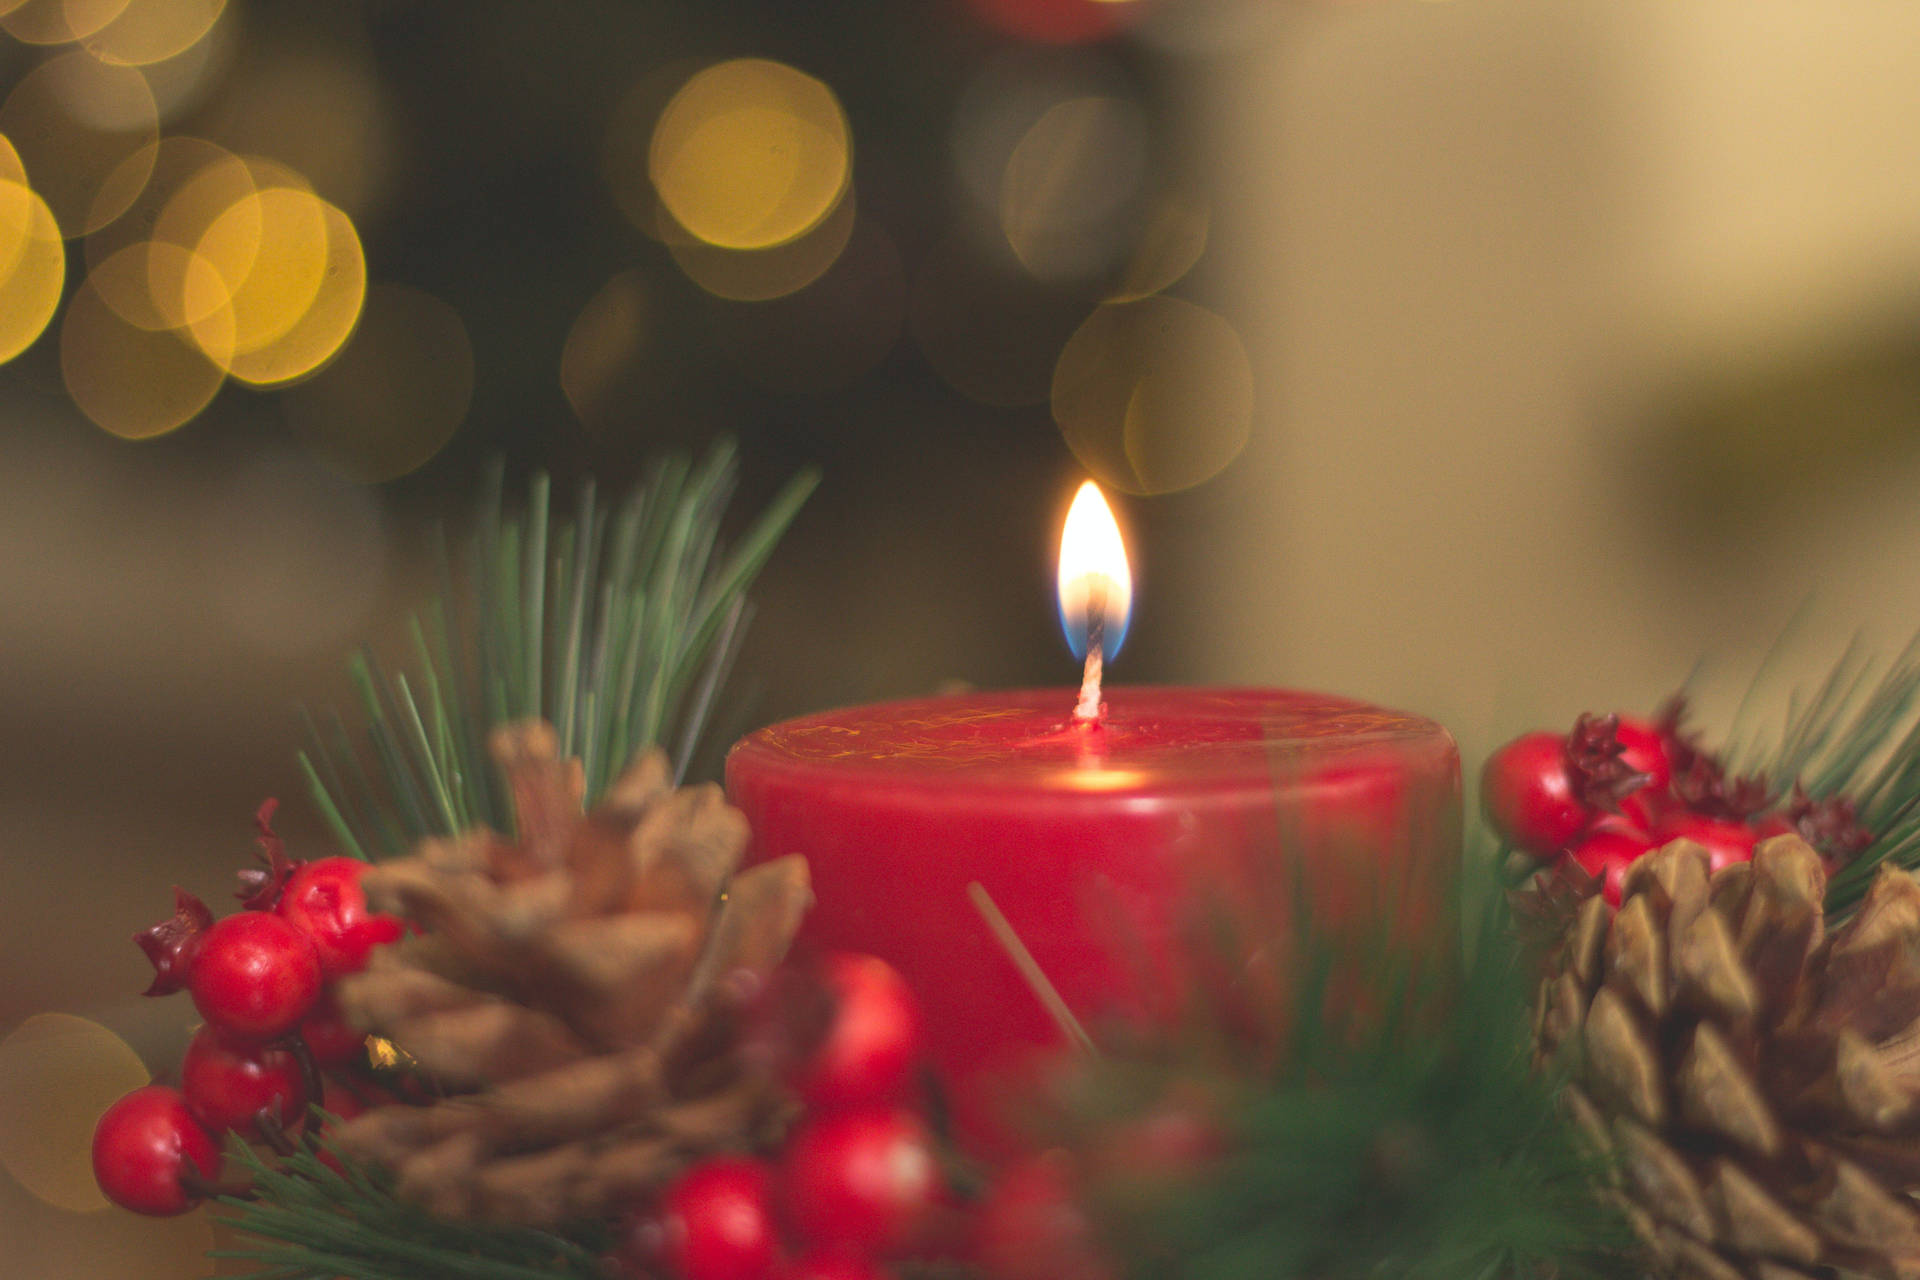 Festive and Serene High Resolution Christmas Candle Image Wallpaper